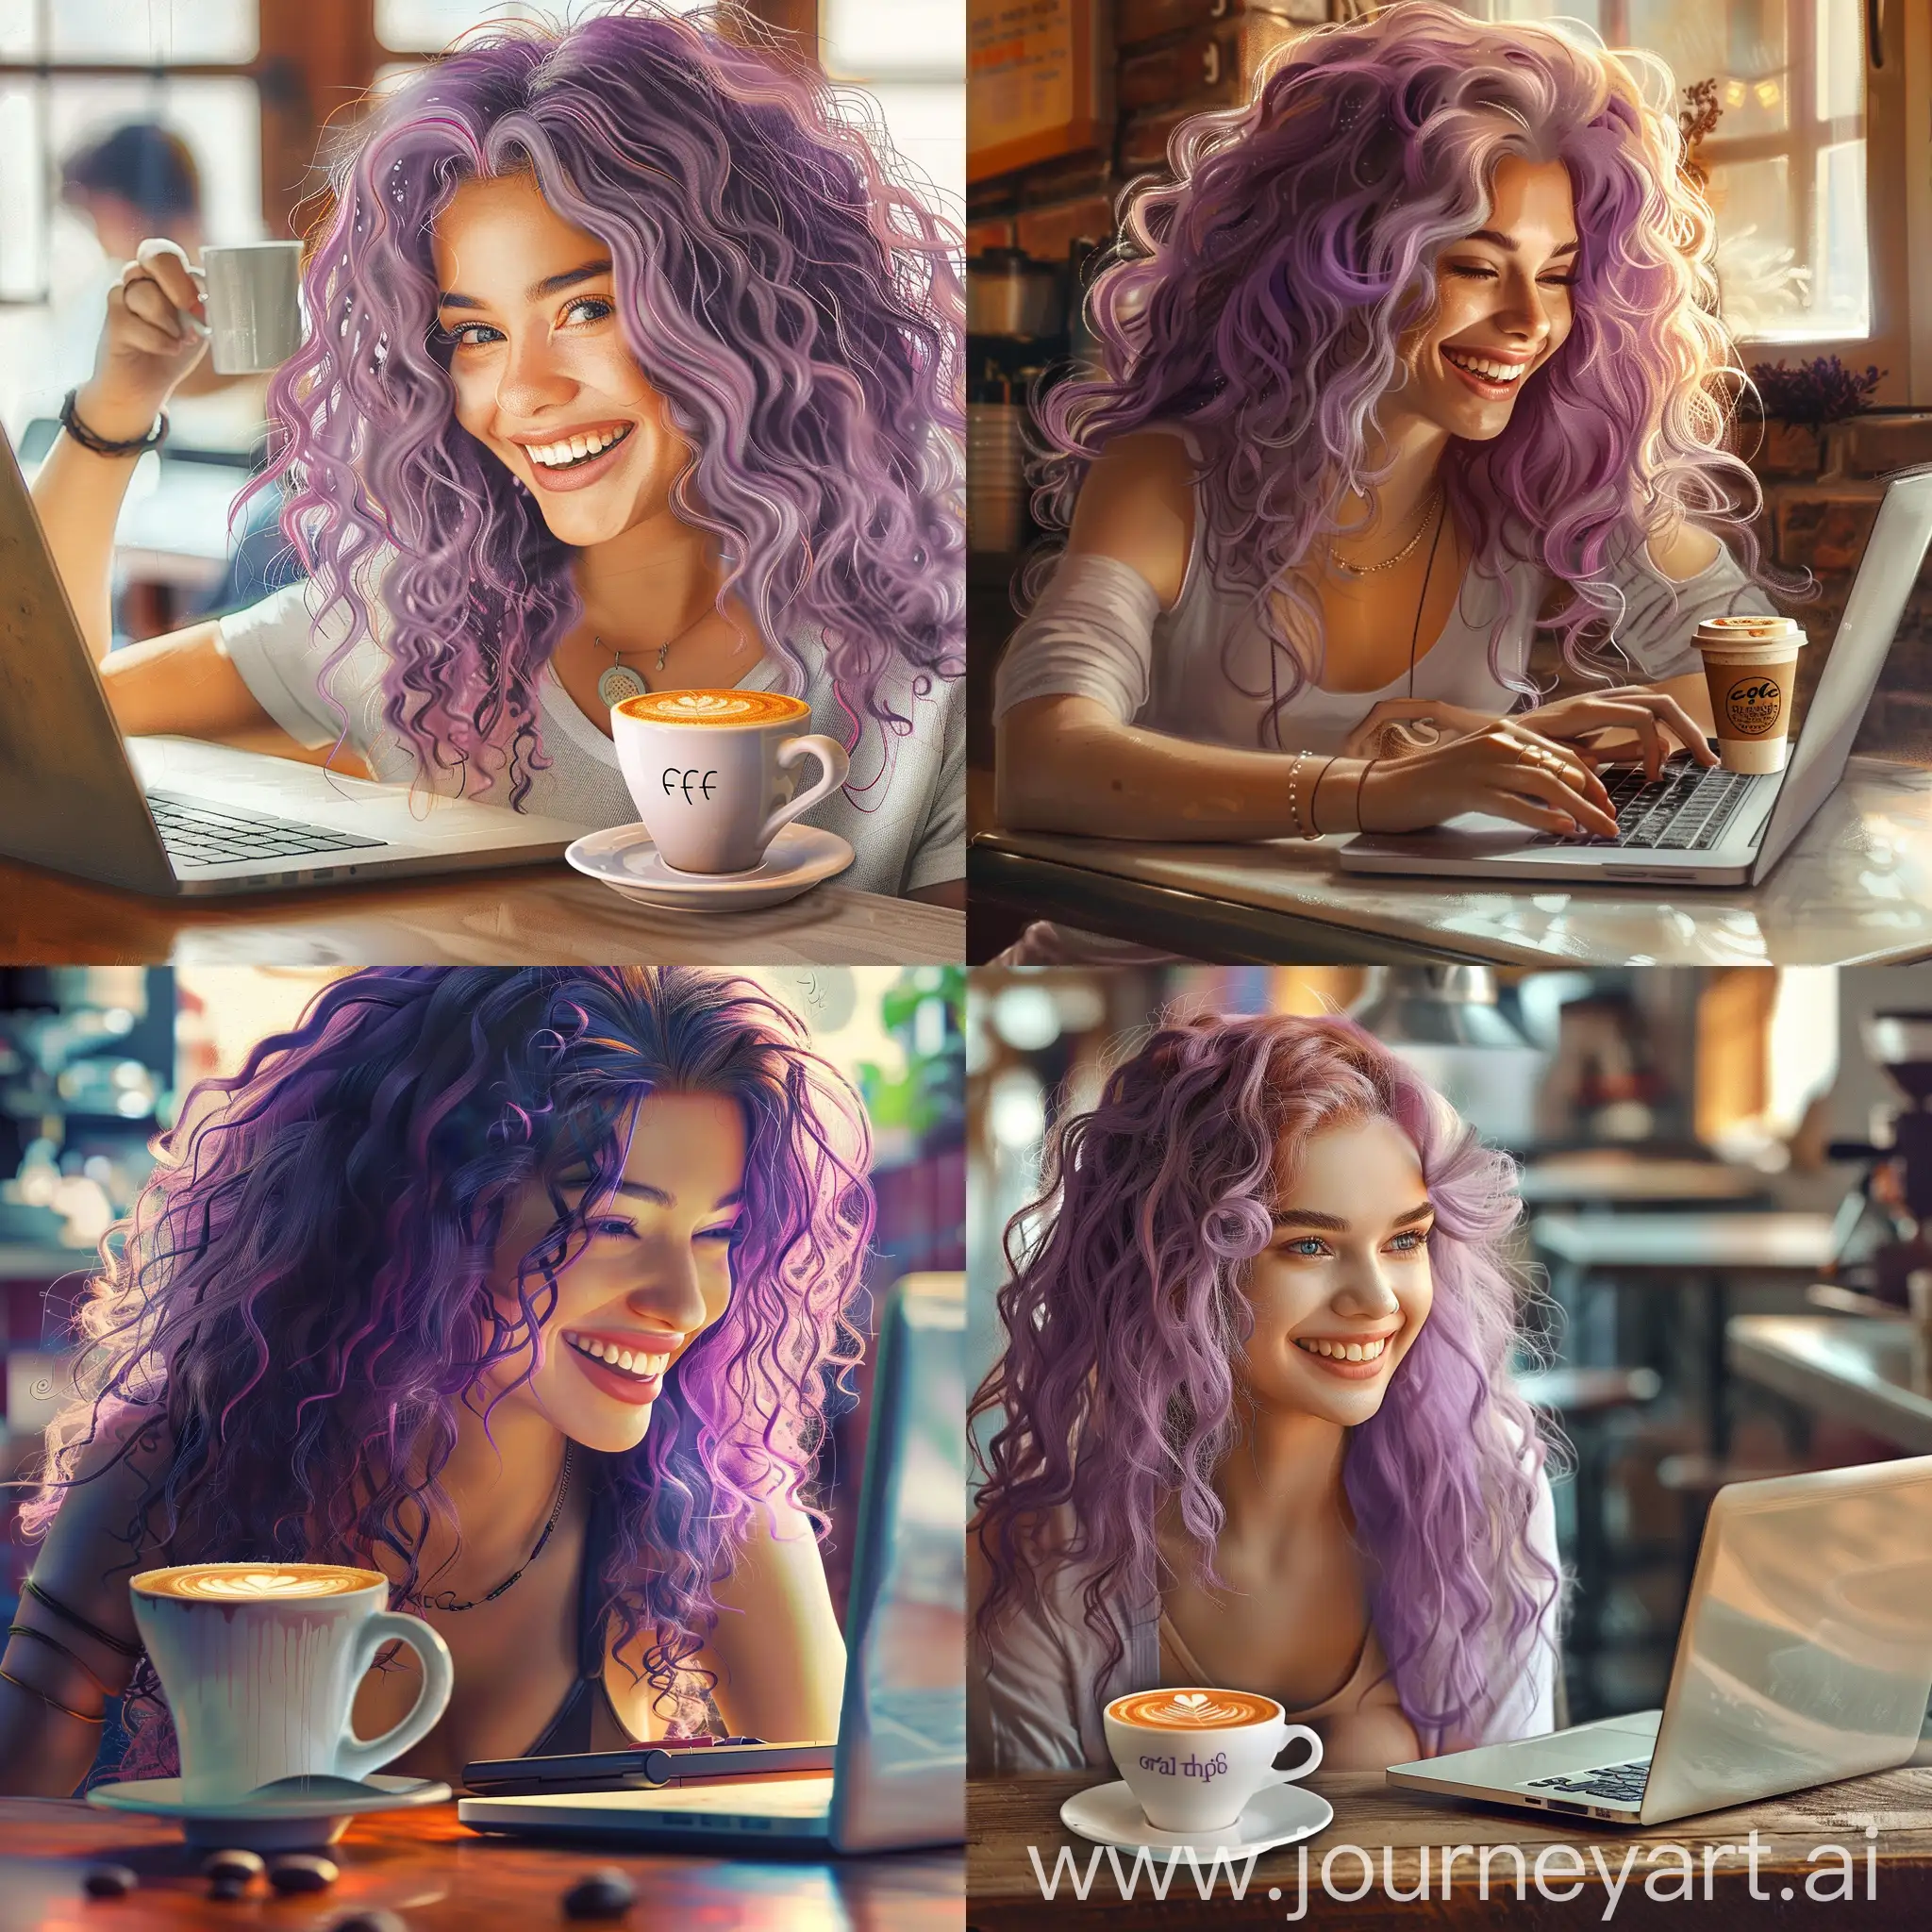 Smiling-Girl-with-Curly-Purple-Hair-Working-on-Laptop-in-Cafe-with-Photorealistic-Coffee